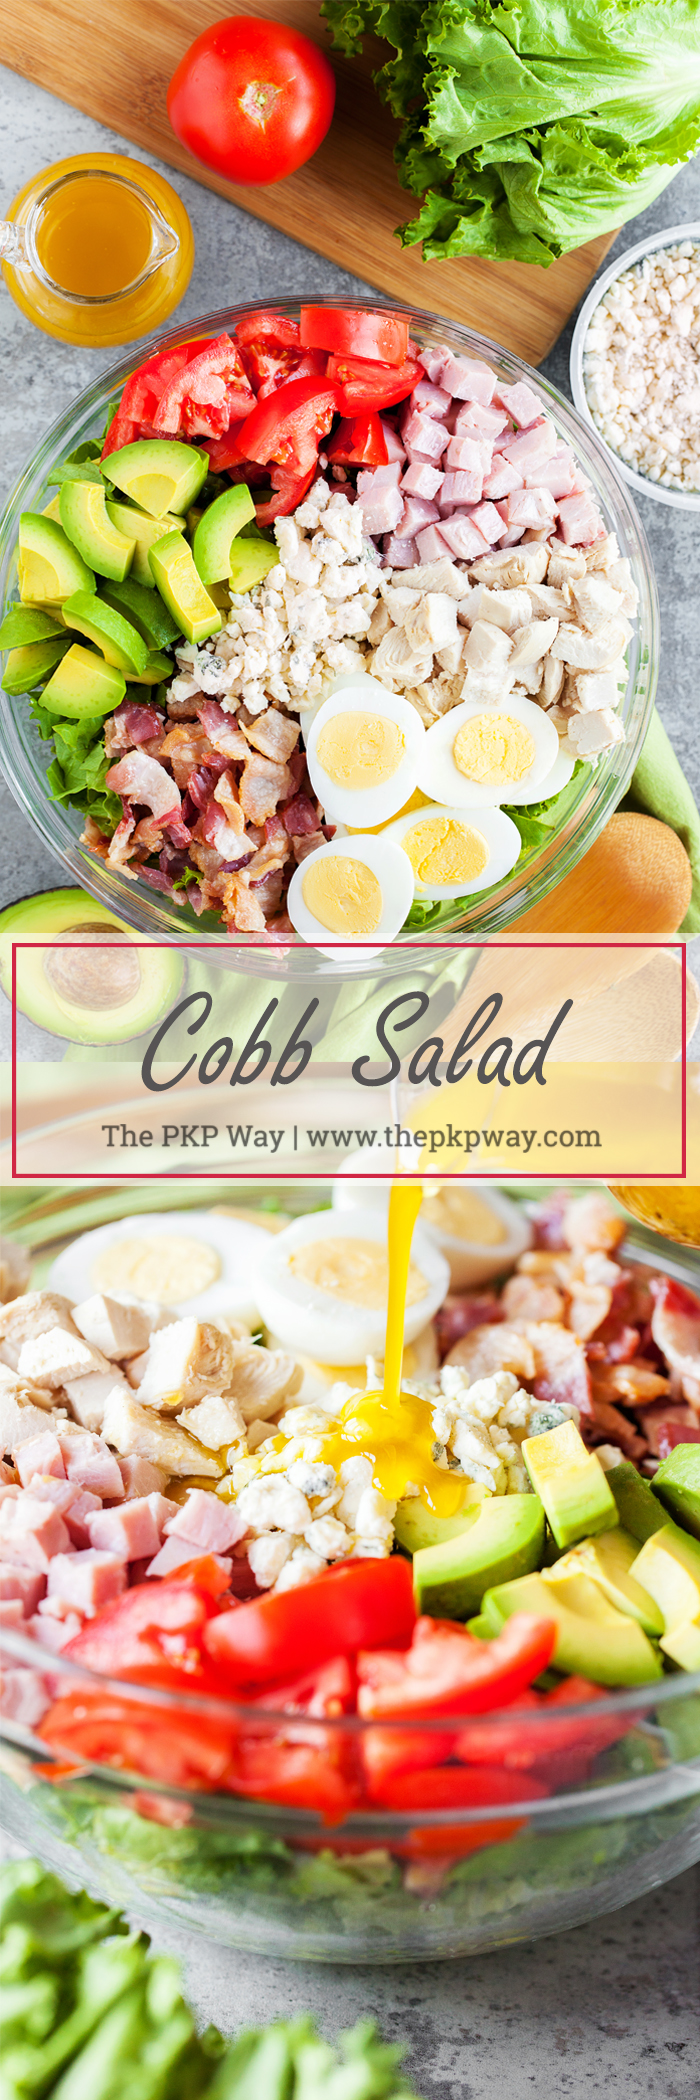 A Classic Cobb Salad loaded with fresh vegetables, three kinds of meat, hard boiled eggs, and blue cheese crumbles.